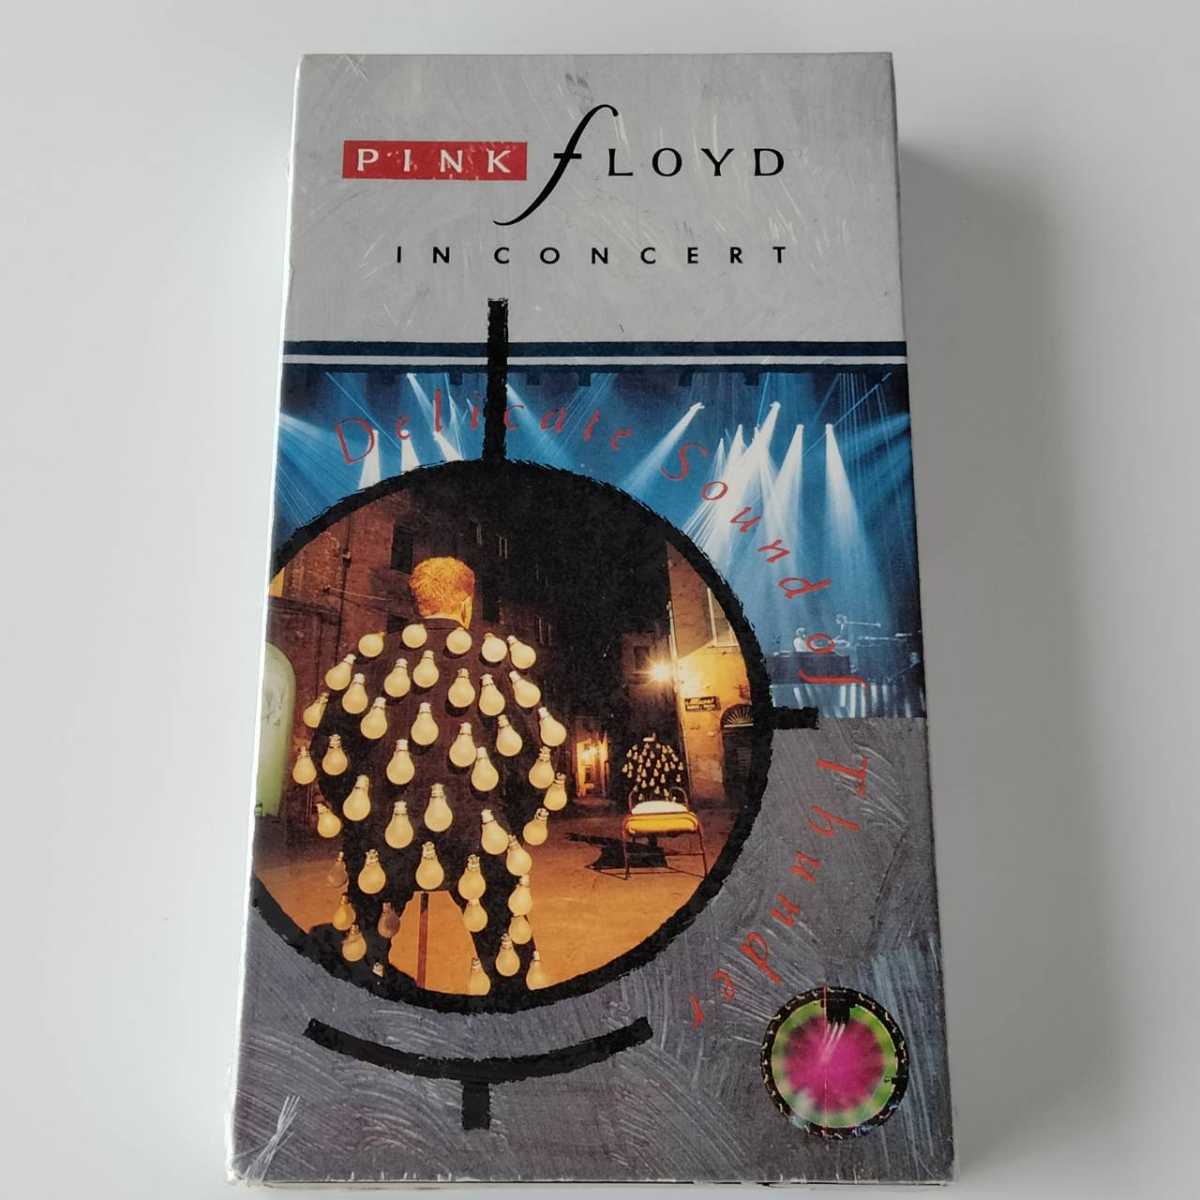 【VHS】Pink Floyd / In Concert Delicate Sound Of Thunder (04474490193) ピンク・フロイド David Gilmour, Nick Mason, Rick Wright_画像1